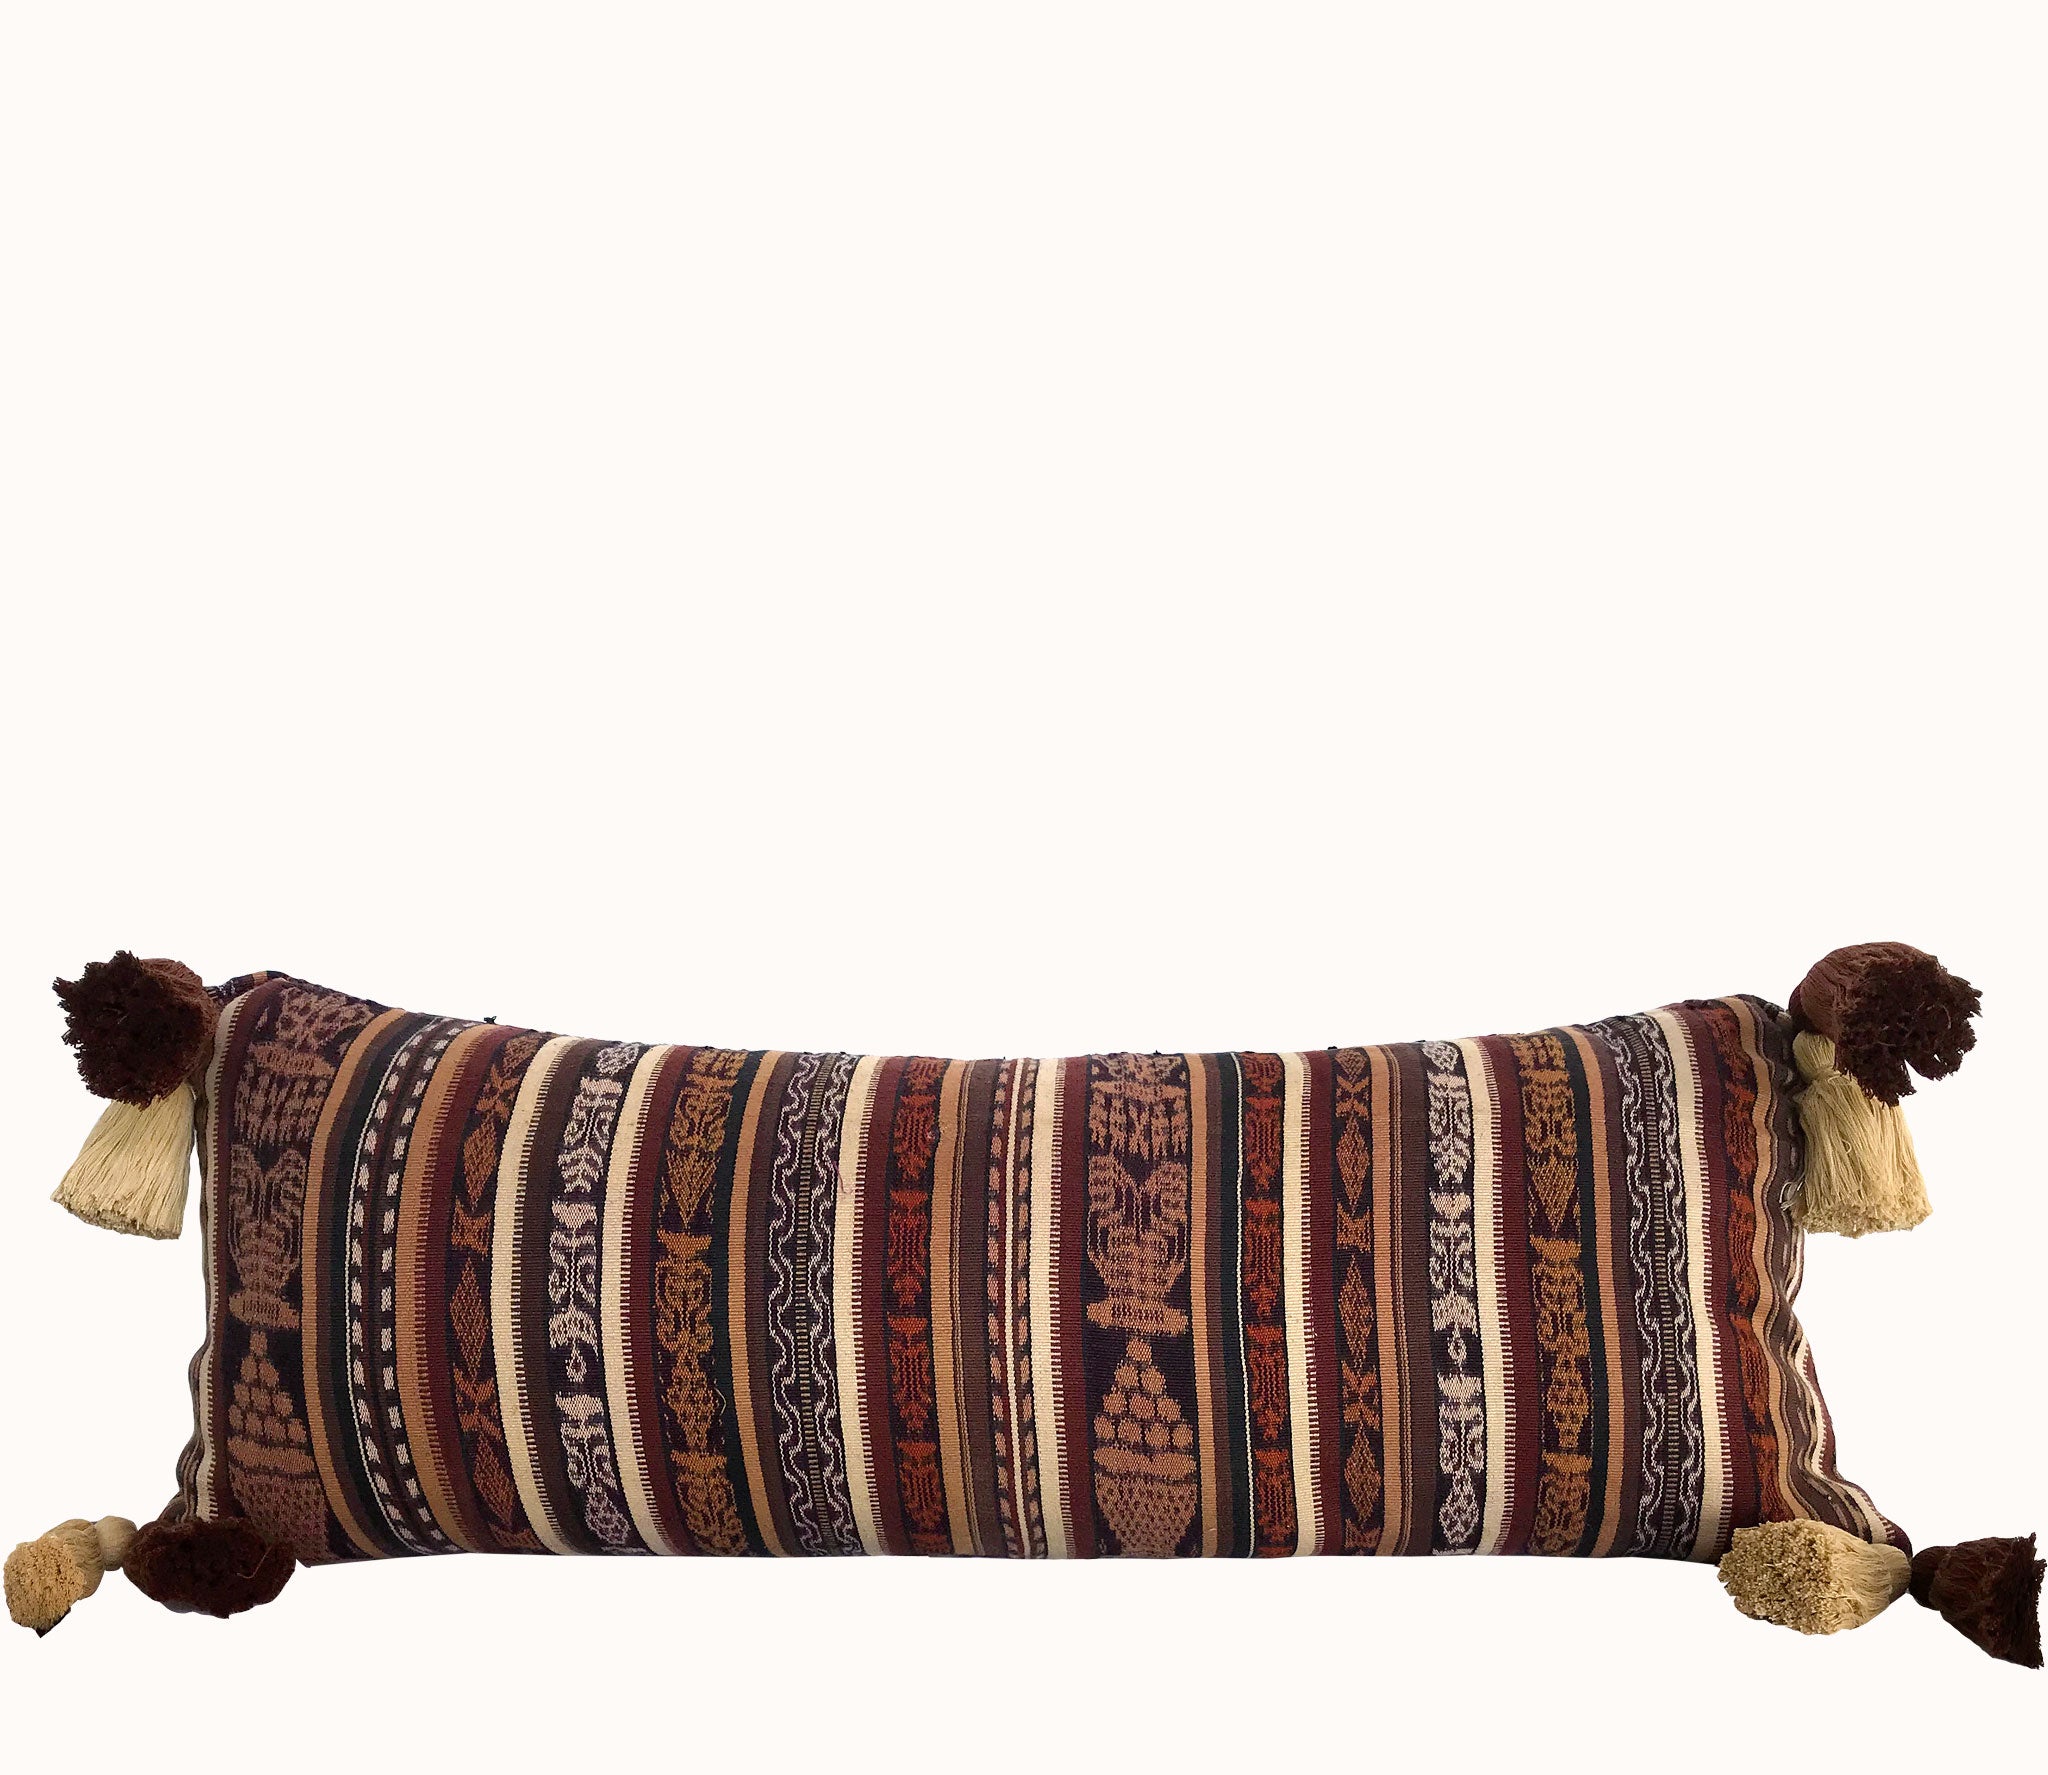 Guatemalan Textile Pillow, vintage, hand woven brown striped ikat lumbar cushion with tassels